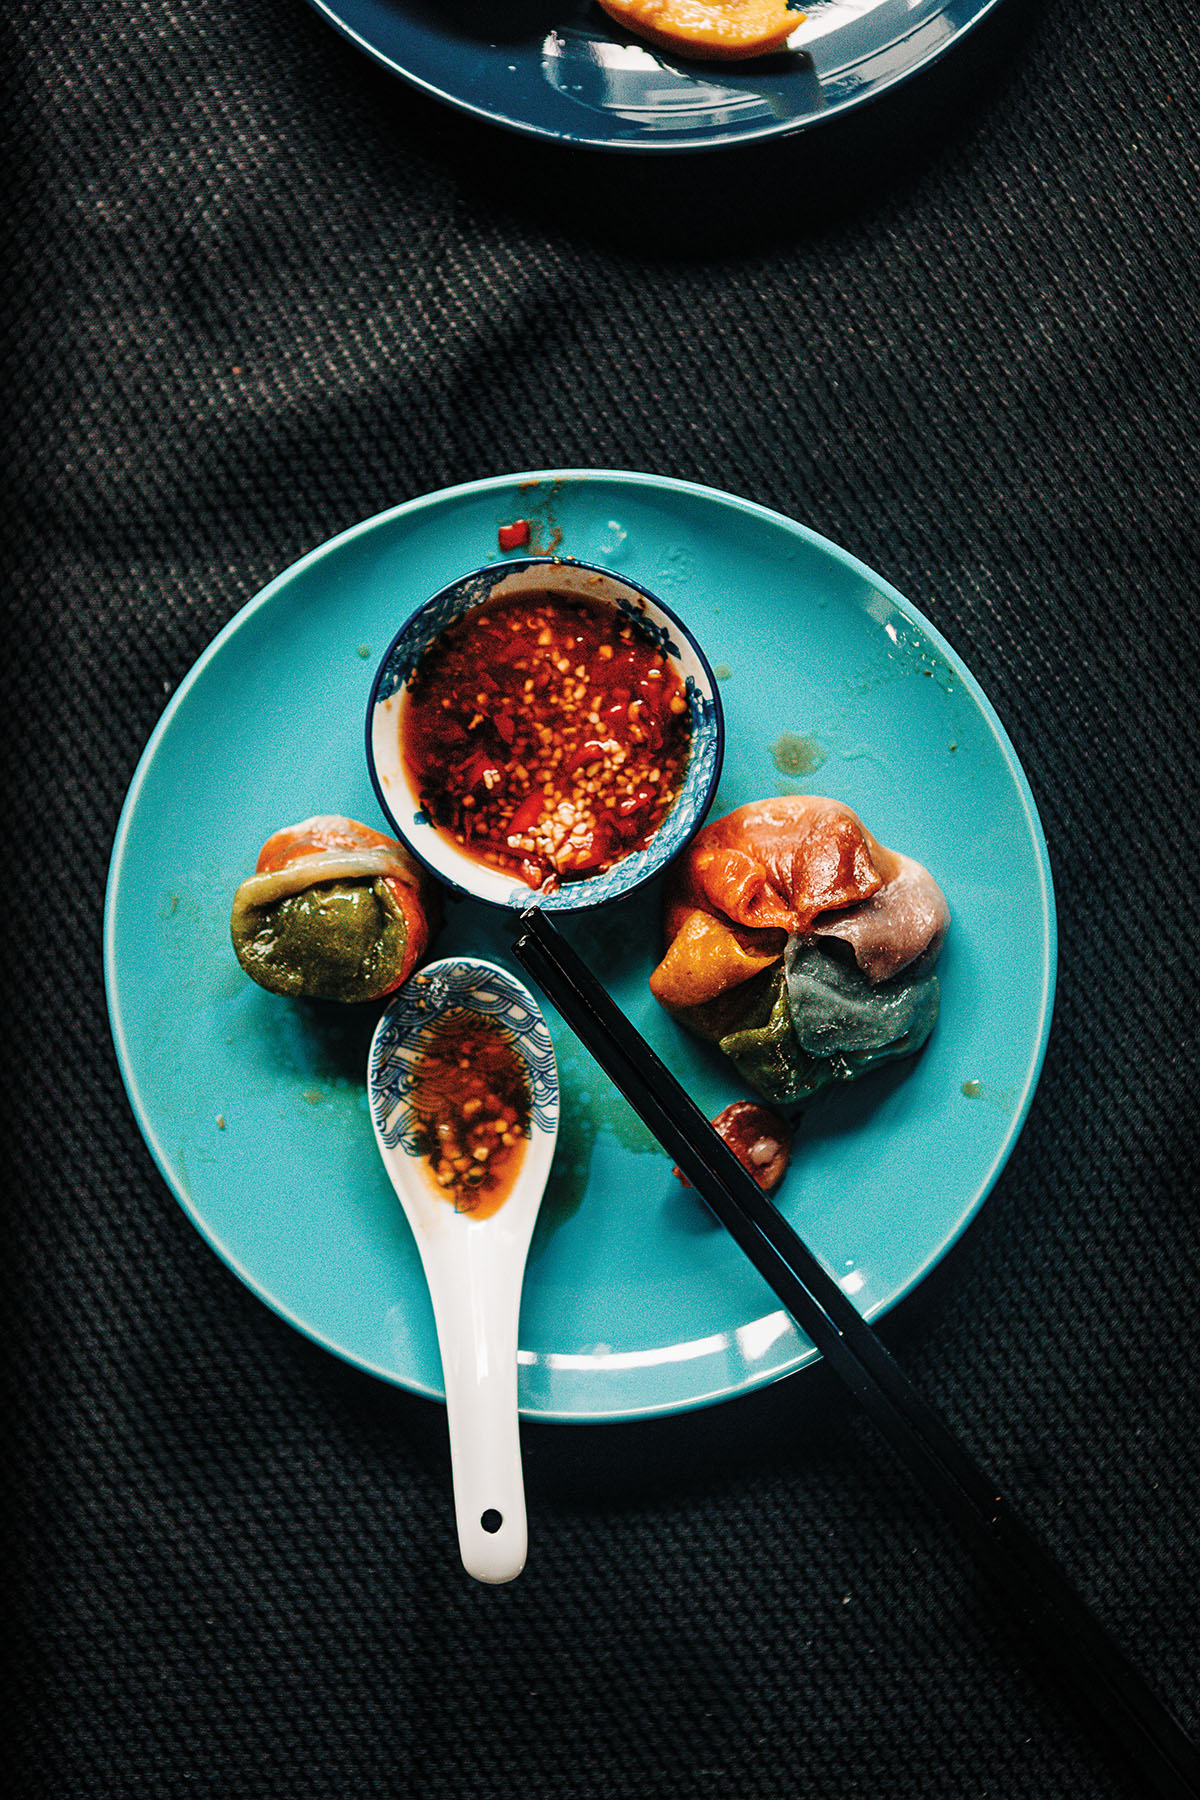 An overhead view of a dumpling, bright red sauce, chopstick and spoon on a teal plate